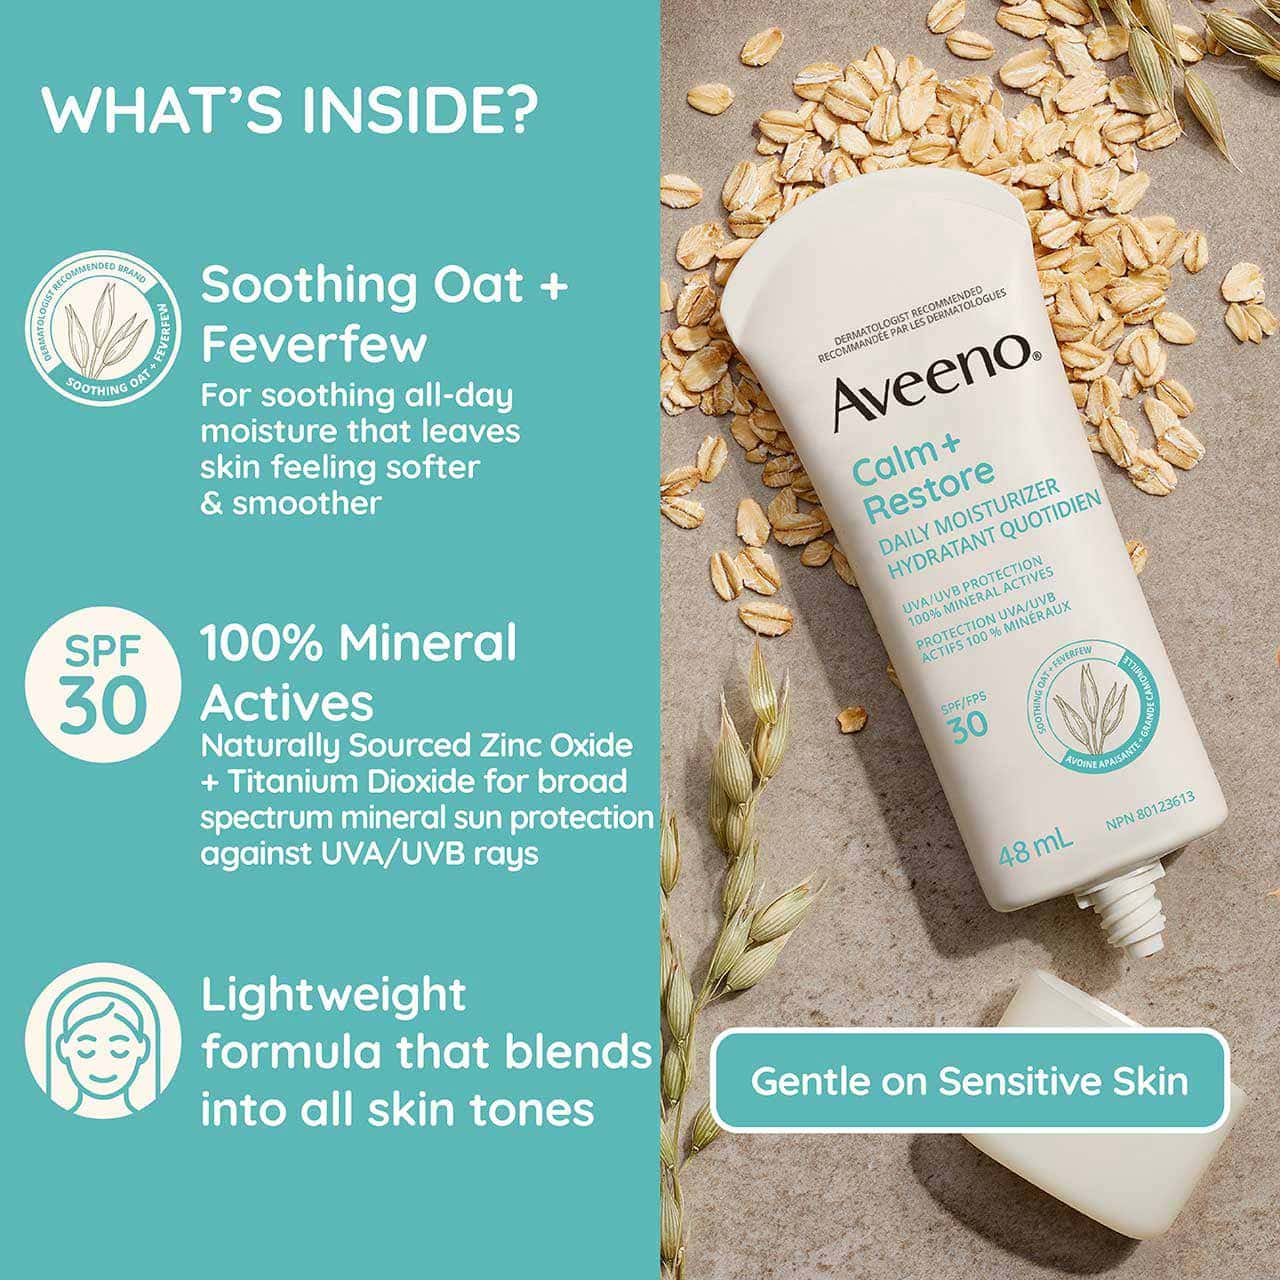 Aveeno® Calm + Restore Daily Moisturizer, Mineral SPF 30, squeeze tube with open lid displayed on rolled oats